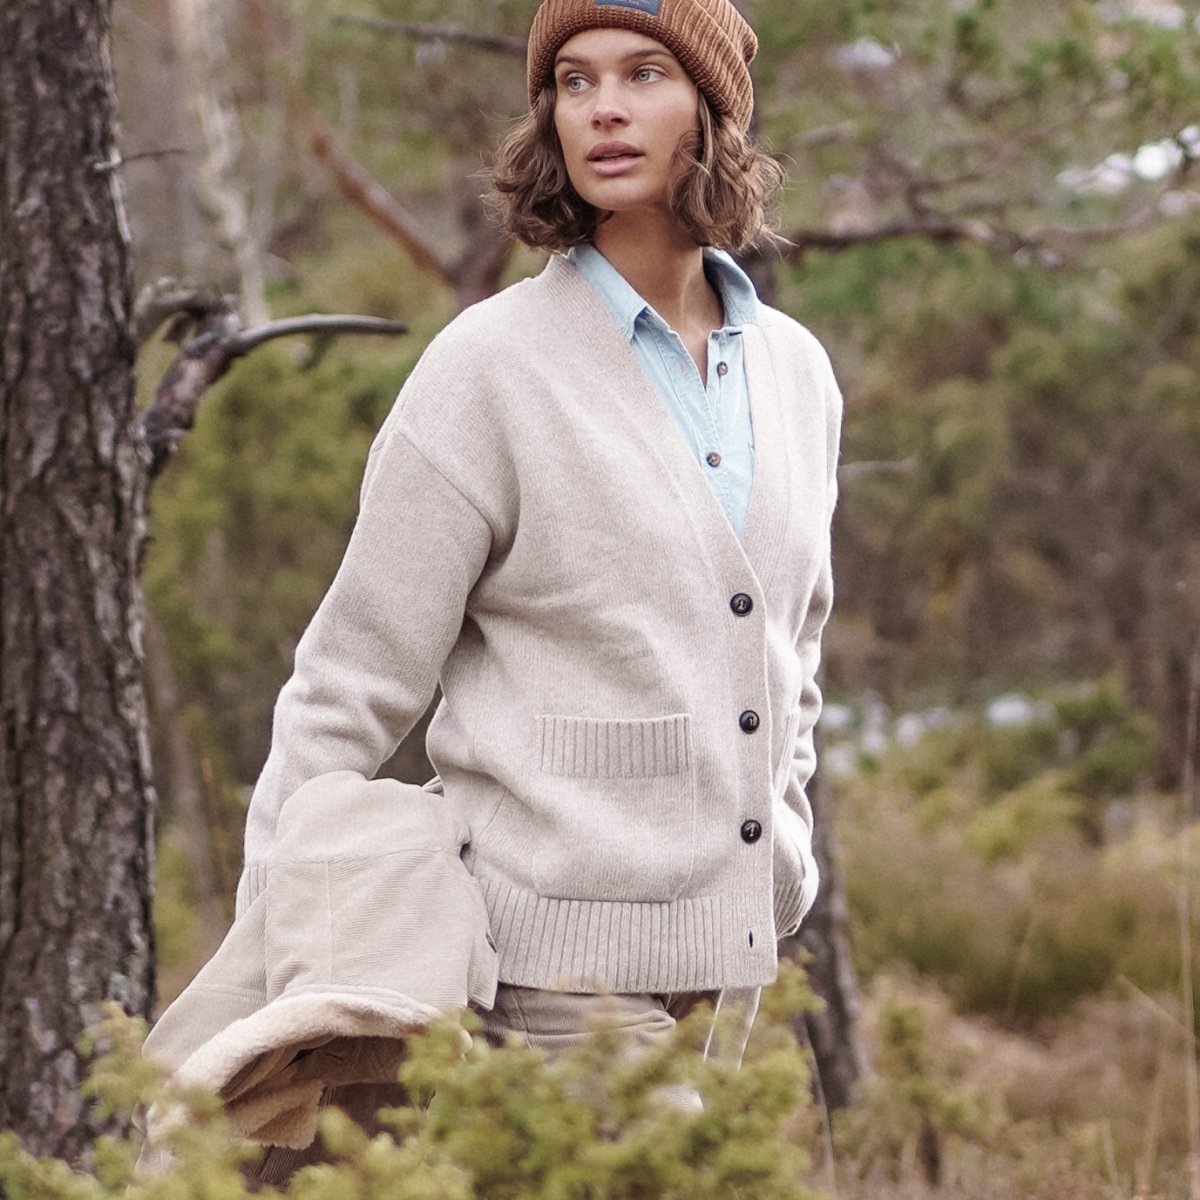 Taloe is the perfect casual cardigan. It's knitted in a thick, soft 100% merino wool that you'll love to bundle up in. 